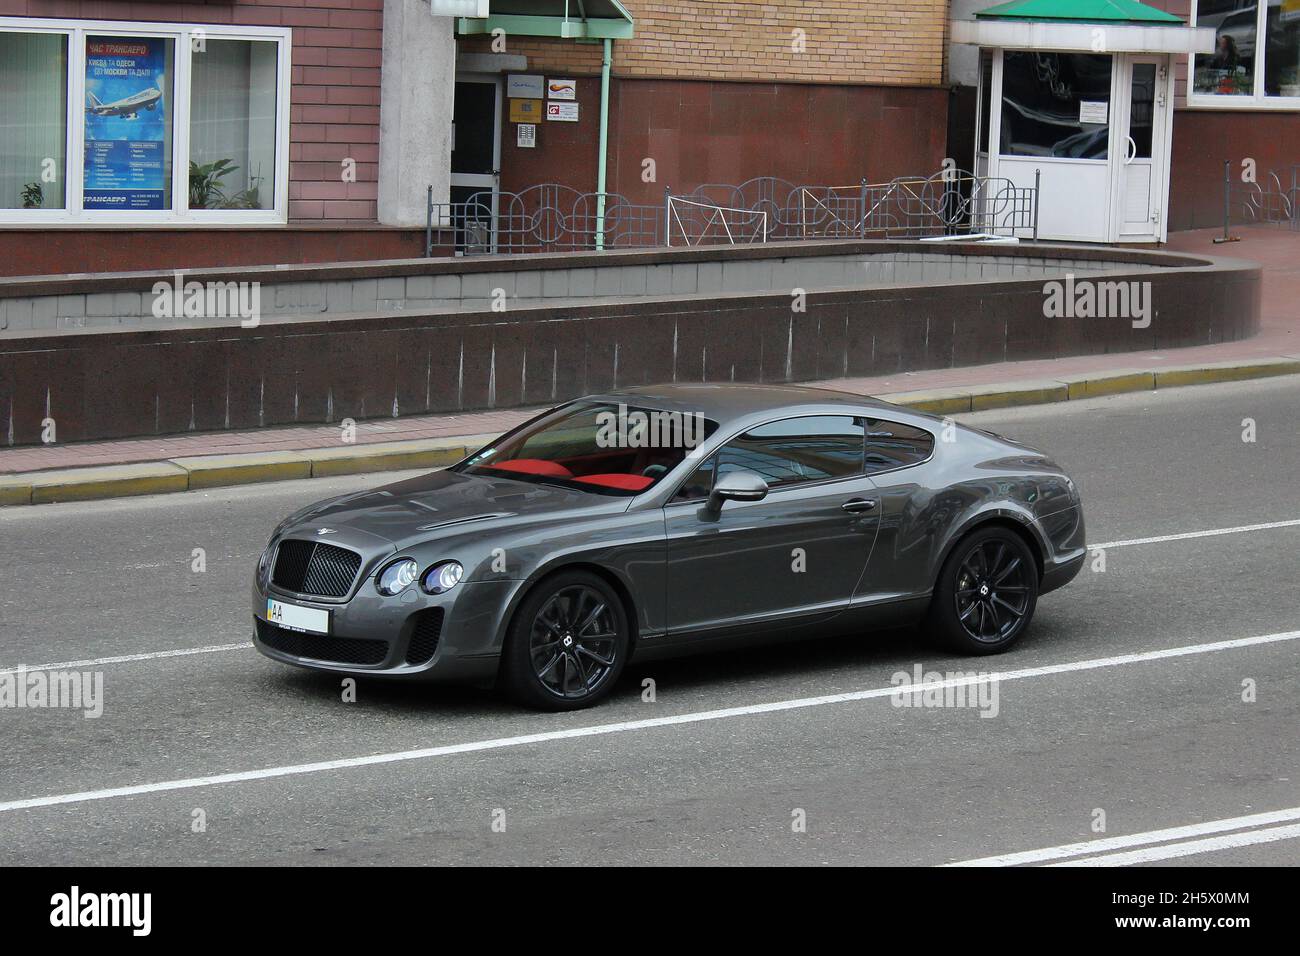 Kiev, UA - October 5; 2010 Bentley Continental Supersports on the road Stock Photo